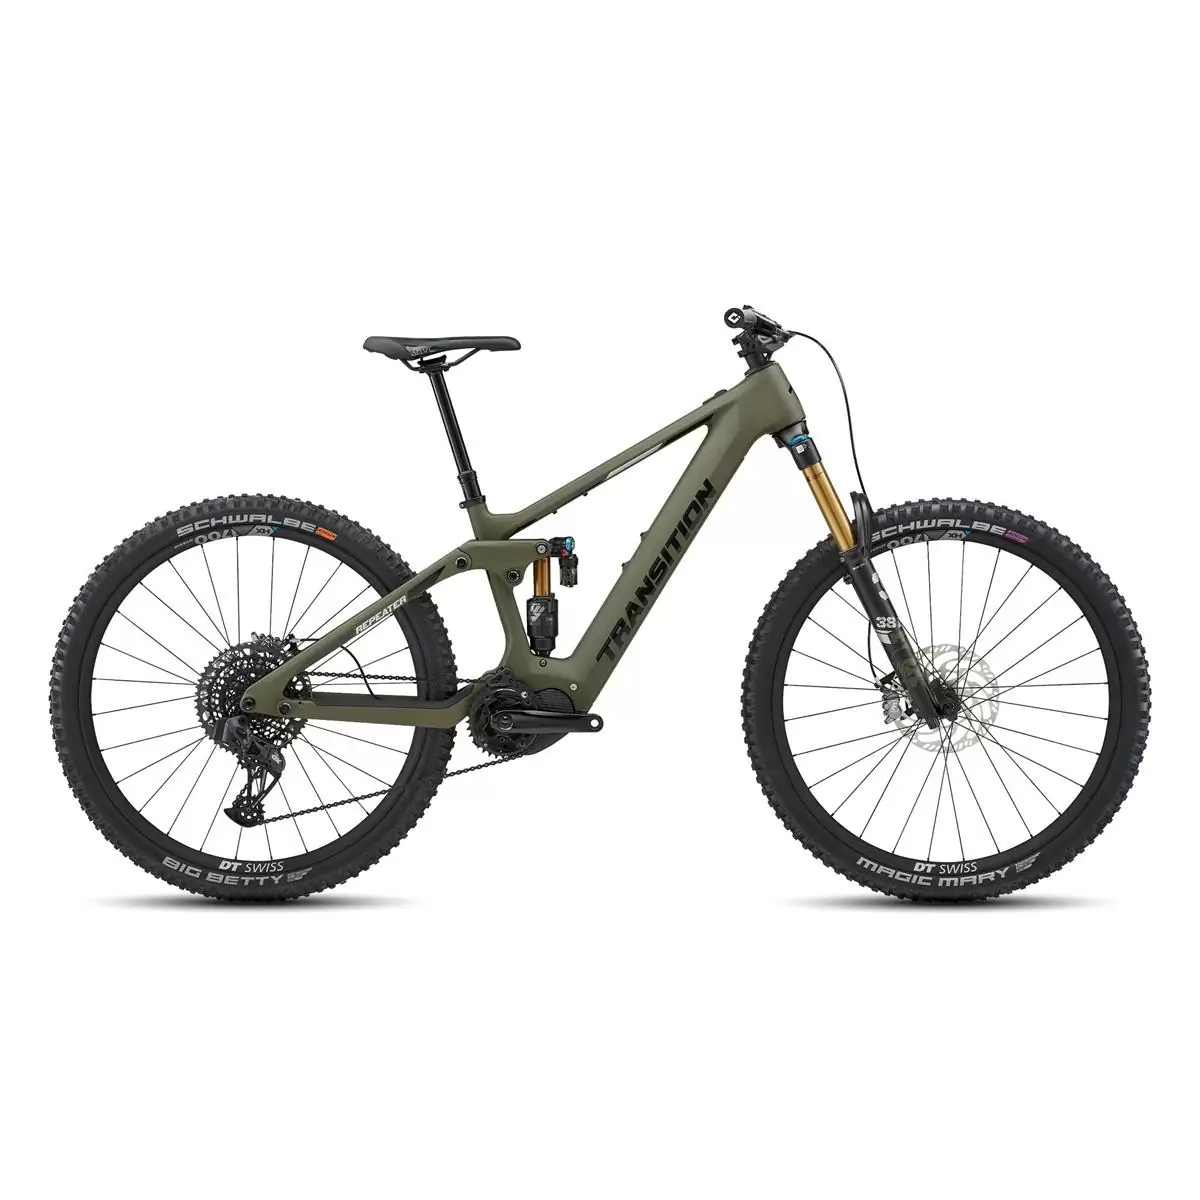 Repetidor Carbono AXS 29'' 160mm 12s 630Wh Shimano EP8 Mossy Green Talla M - image